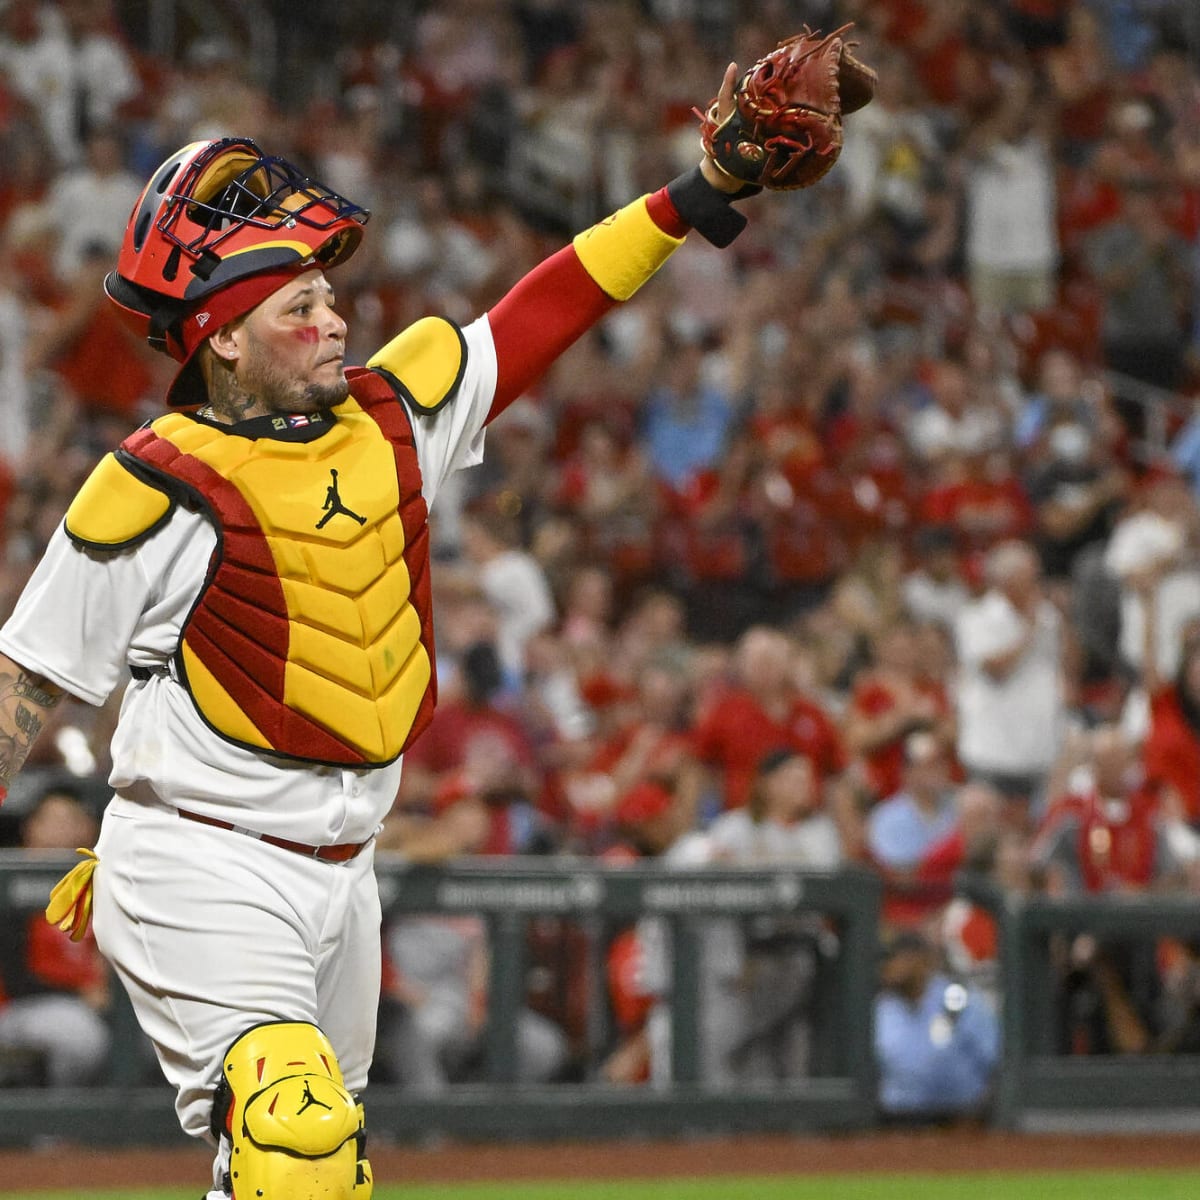 Yadier Molina wore the flashiest gold gear